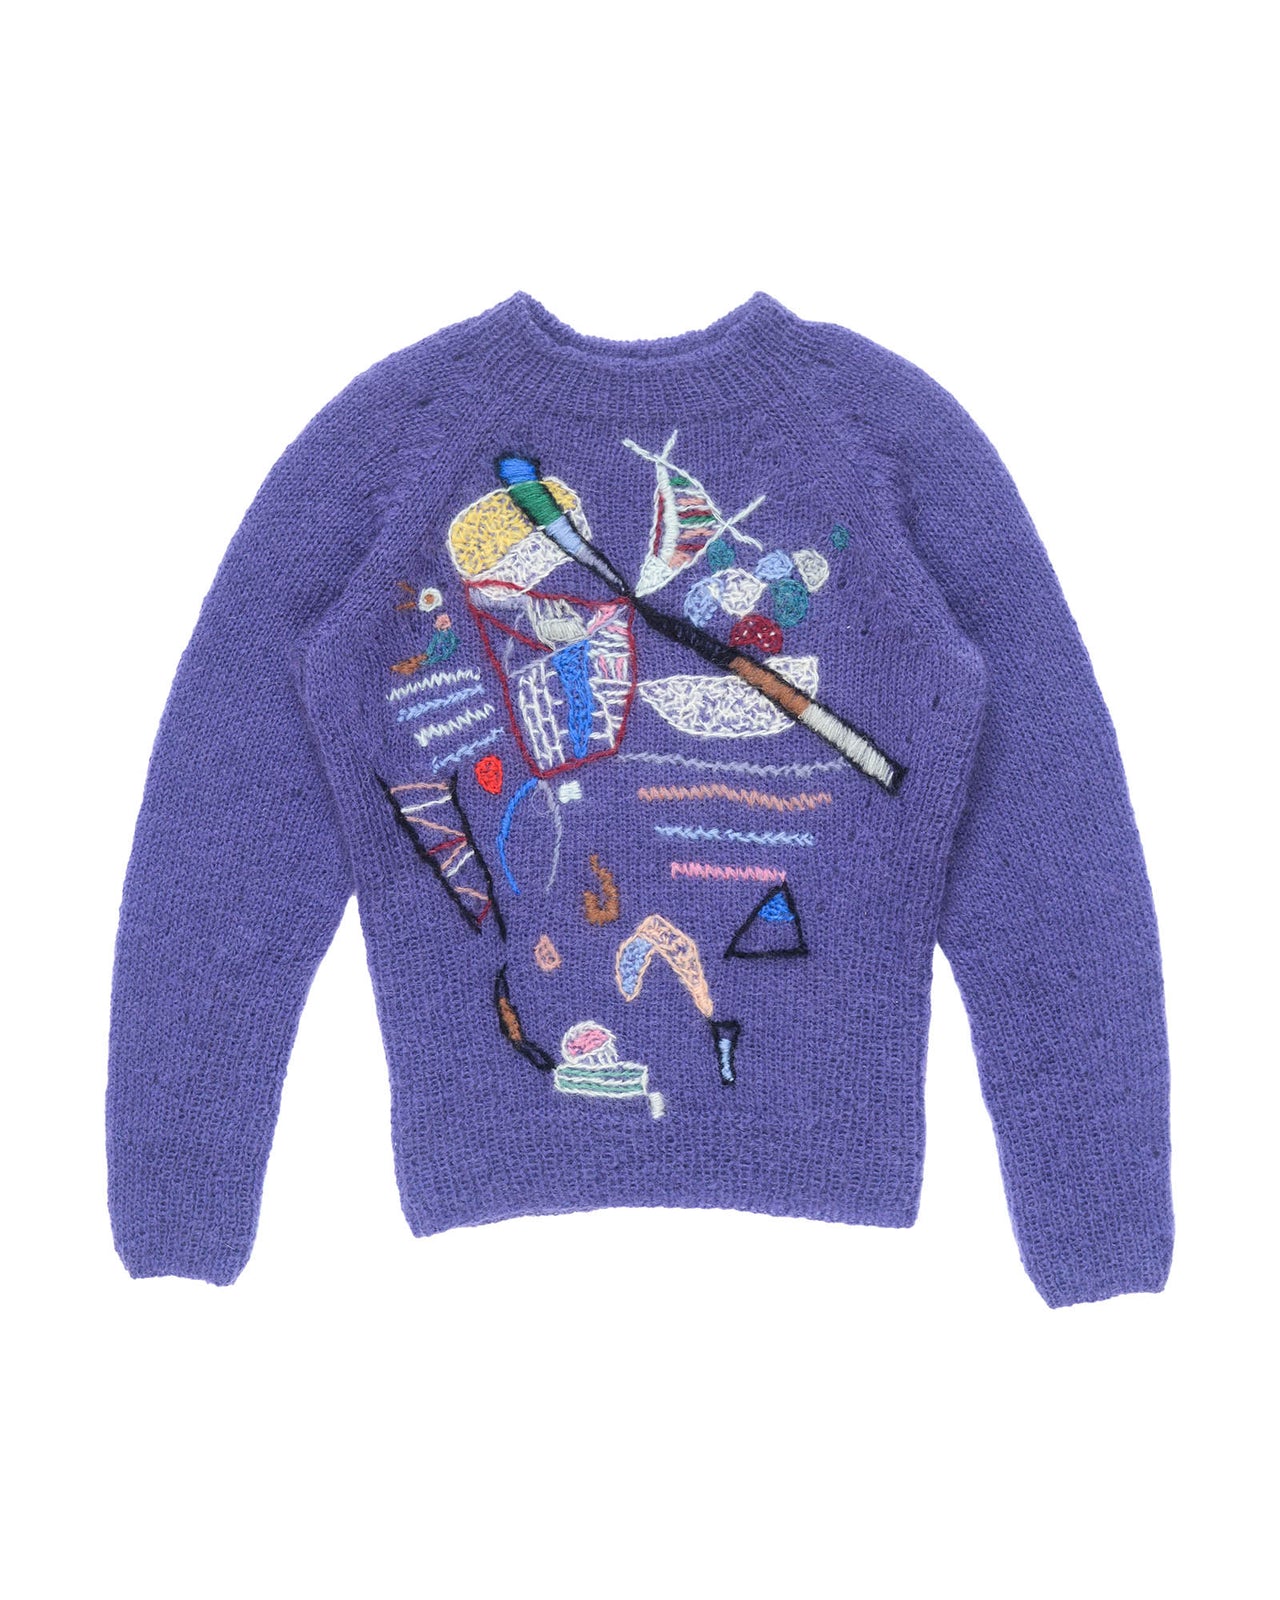 Purple mohair sweater laid flat on white background. The sweater has colourful abstract motifs embroidered over it. 